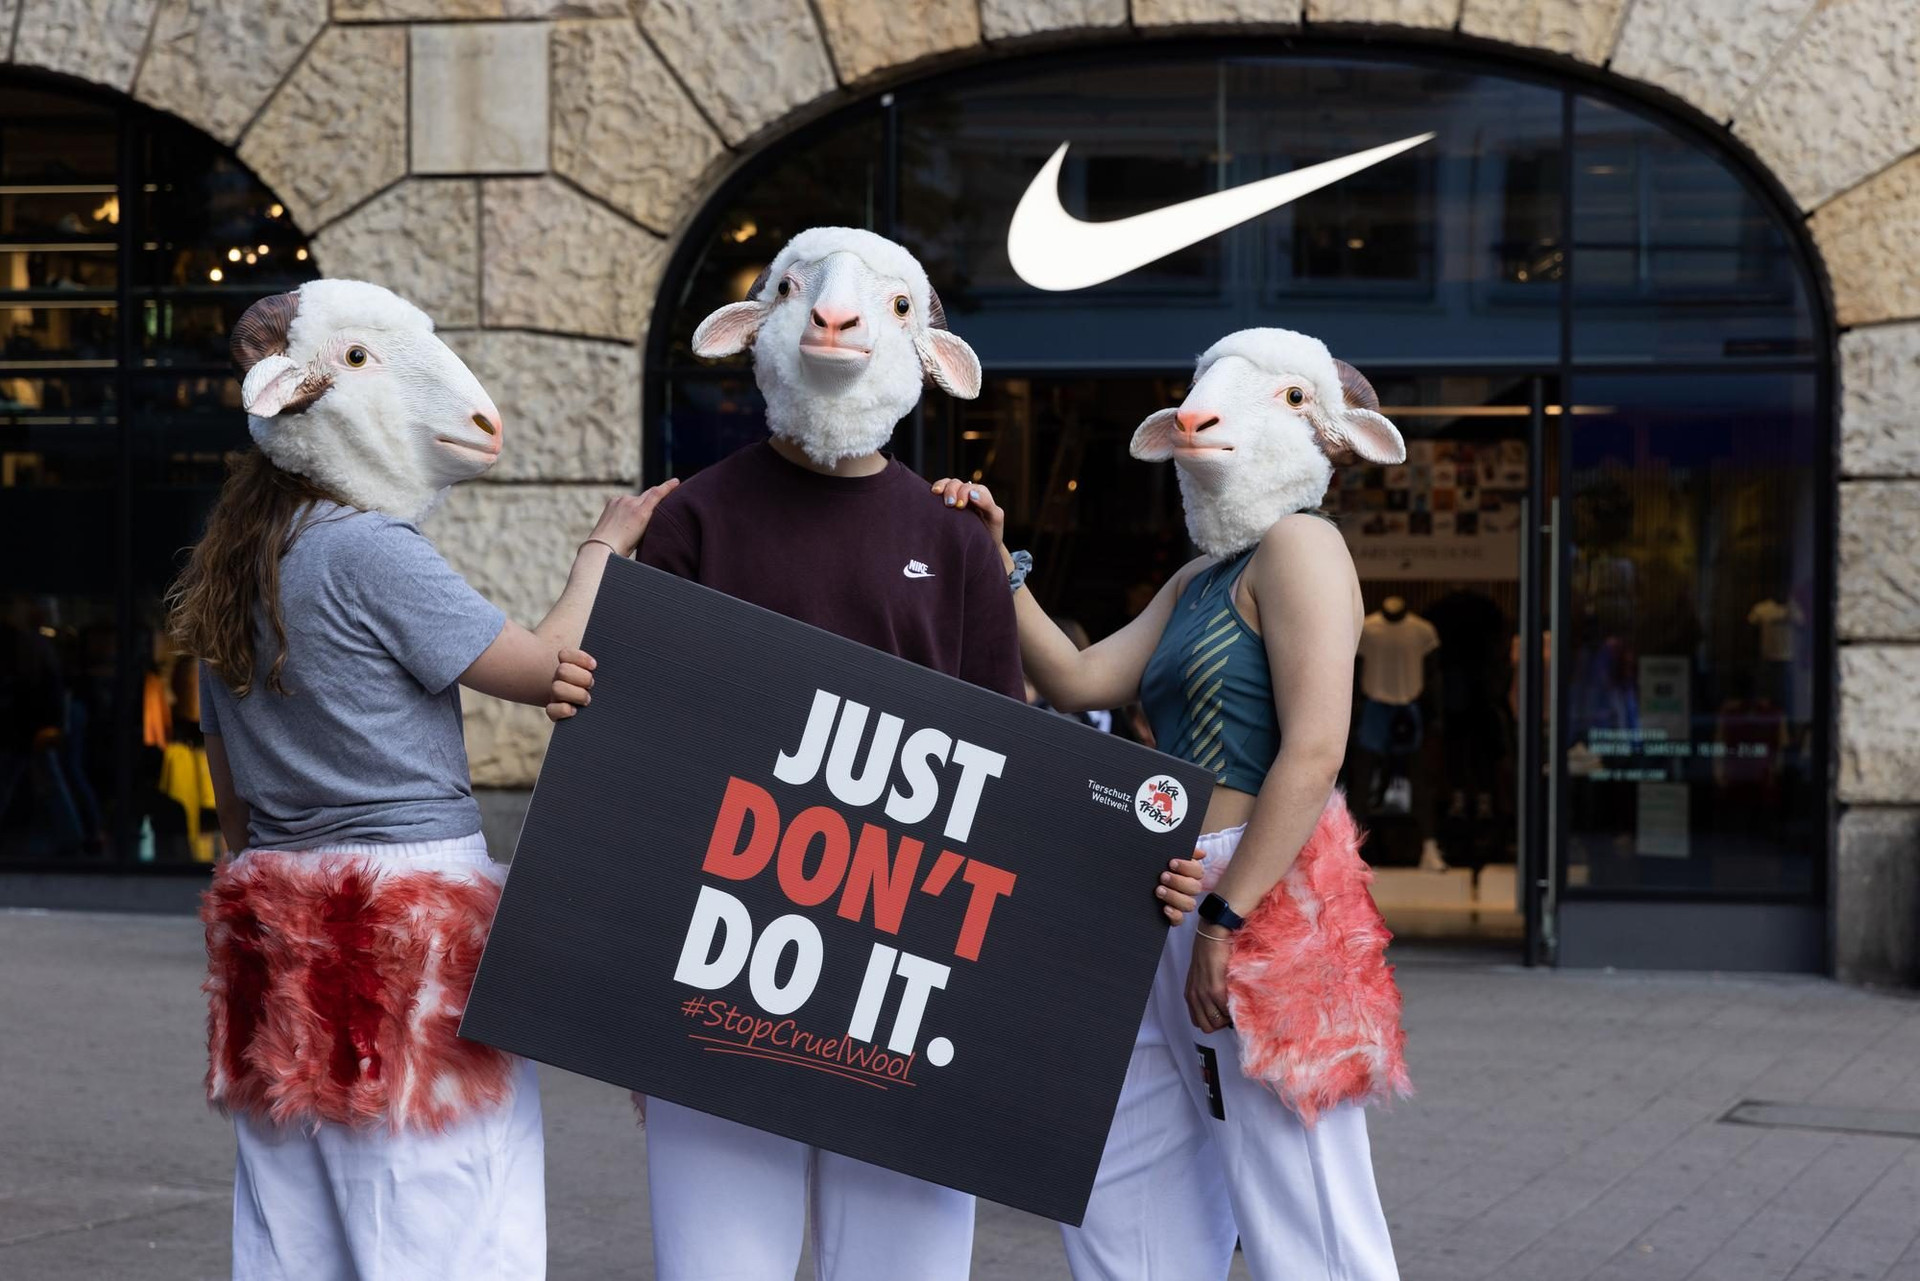 Protesters wearing sheep masks outside a Nike store with a placard saying "Just don't do it: #StopCruelWool".